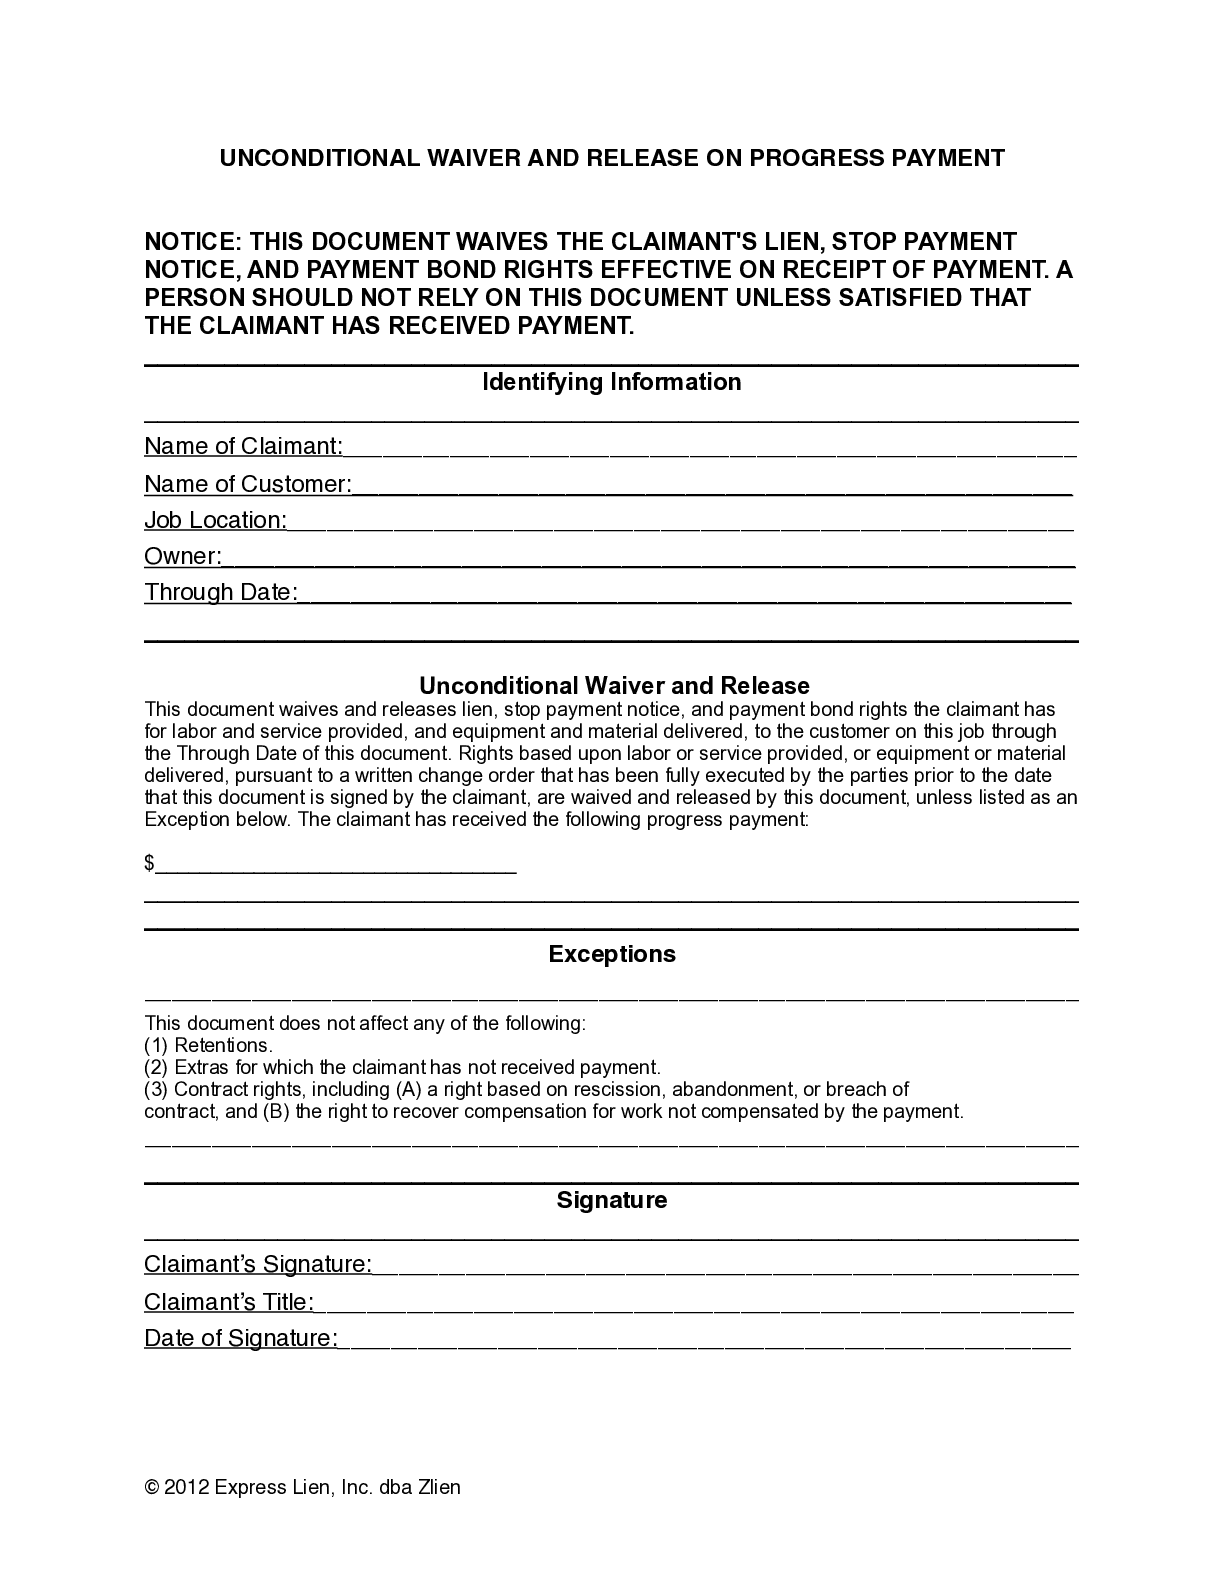 Wisconsin Partial Unconditional Lien Waiver Form - free from